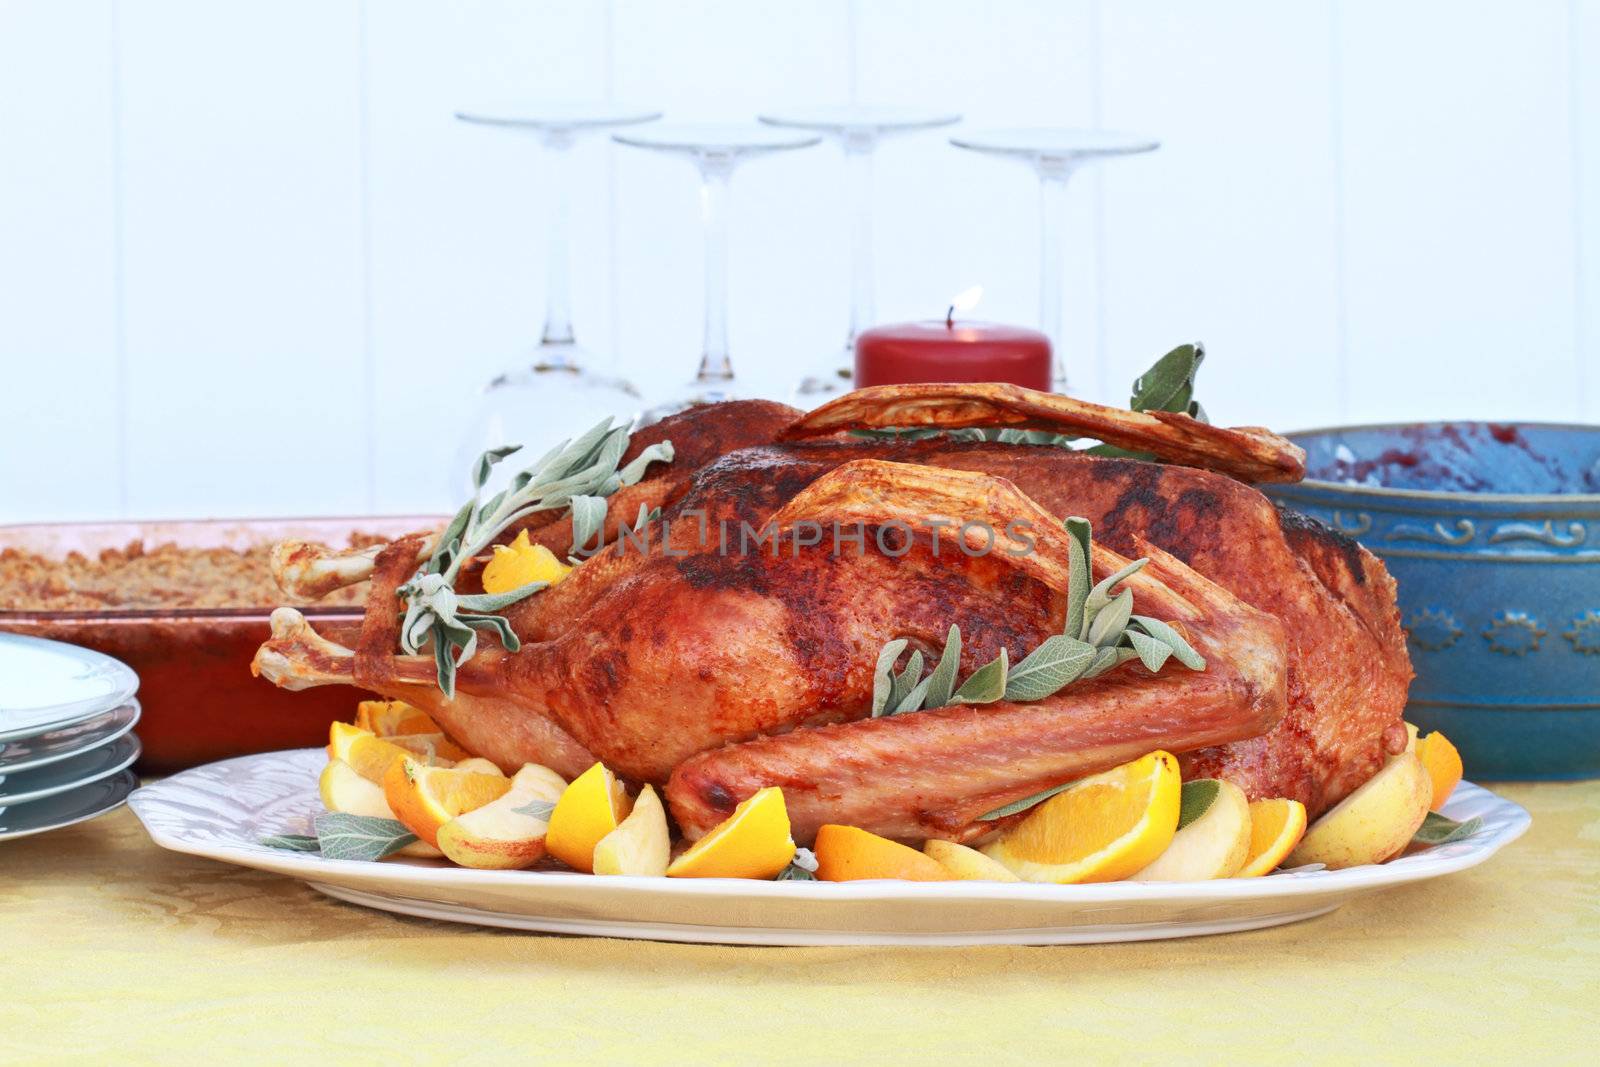 Baked Christmas goose with fresh oranges, apples and sage. Served with cranberry sauce and sweet potato souffle. Shallow DOF.